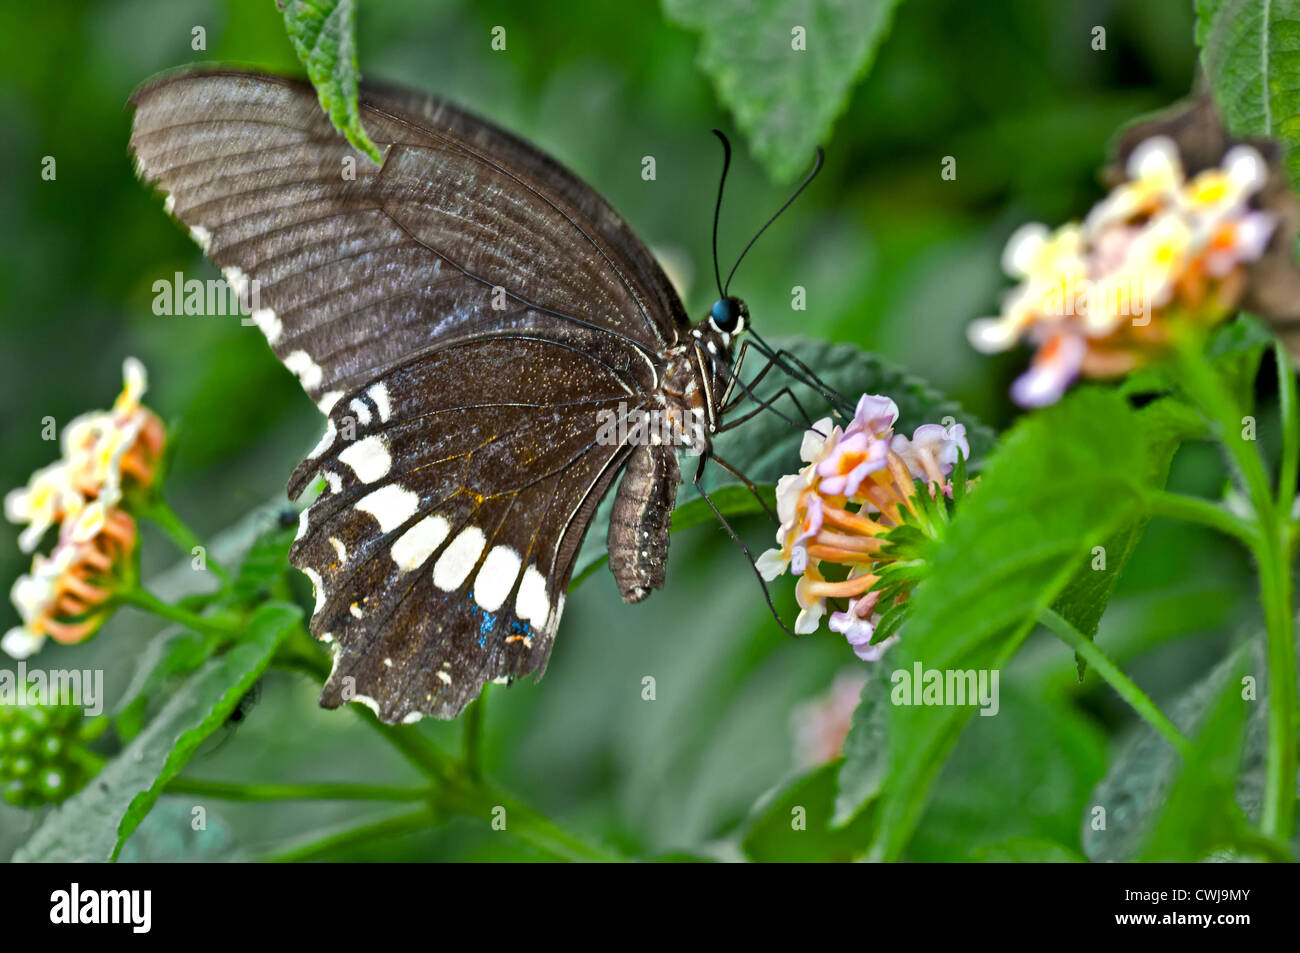 Butterfly, Common Mormon, Papilio polytes, sucking honey from flower, pollinate, close up, copy space Stock Photo